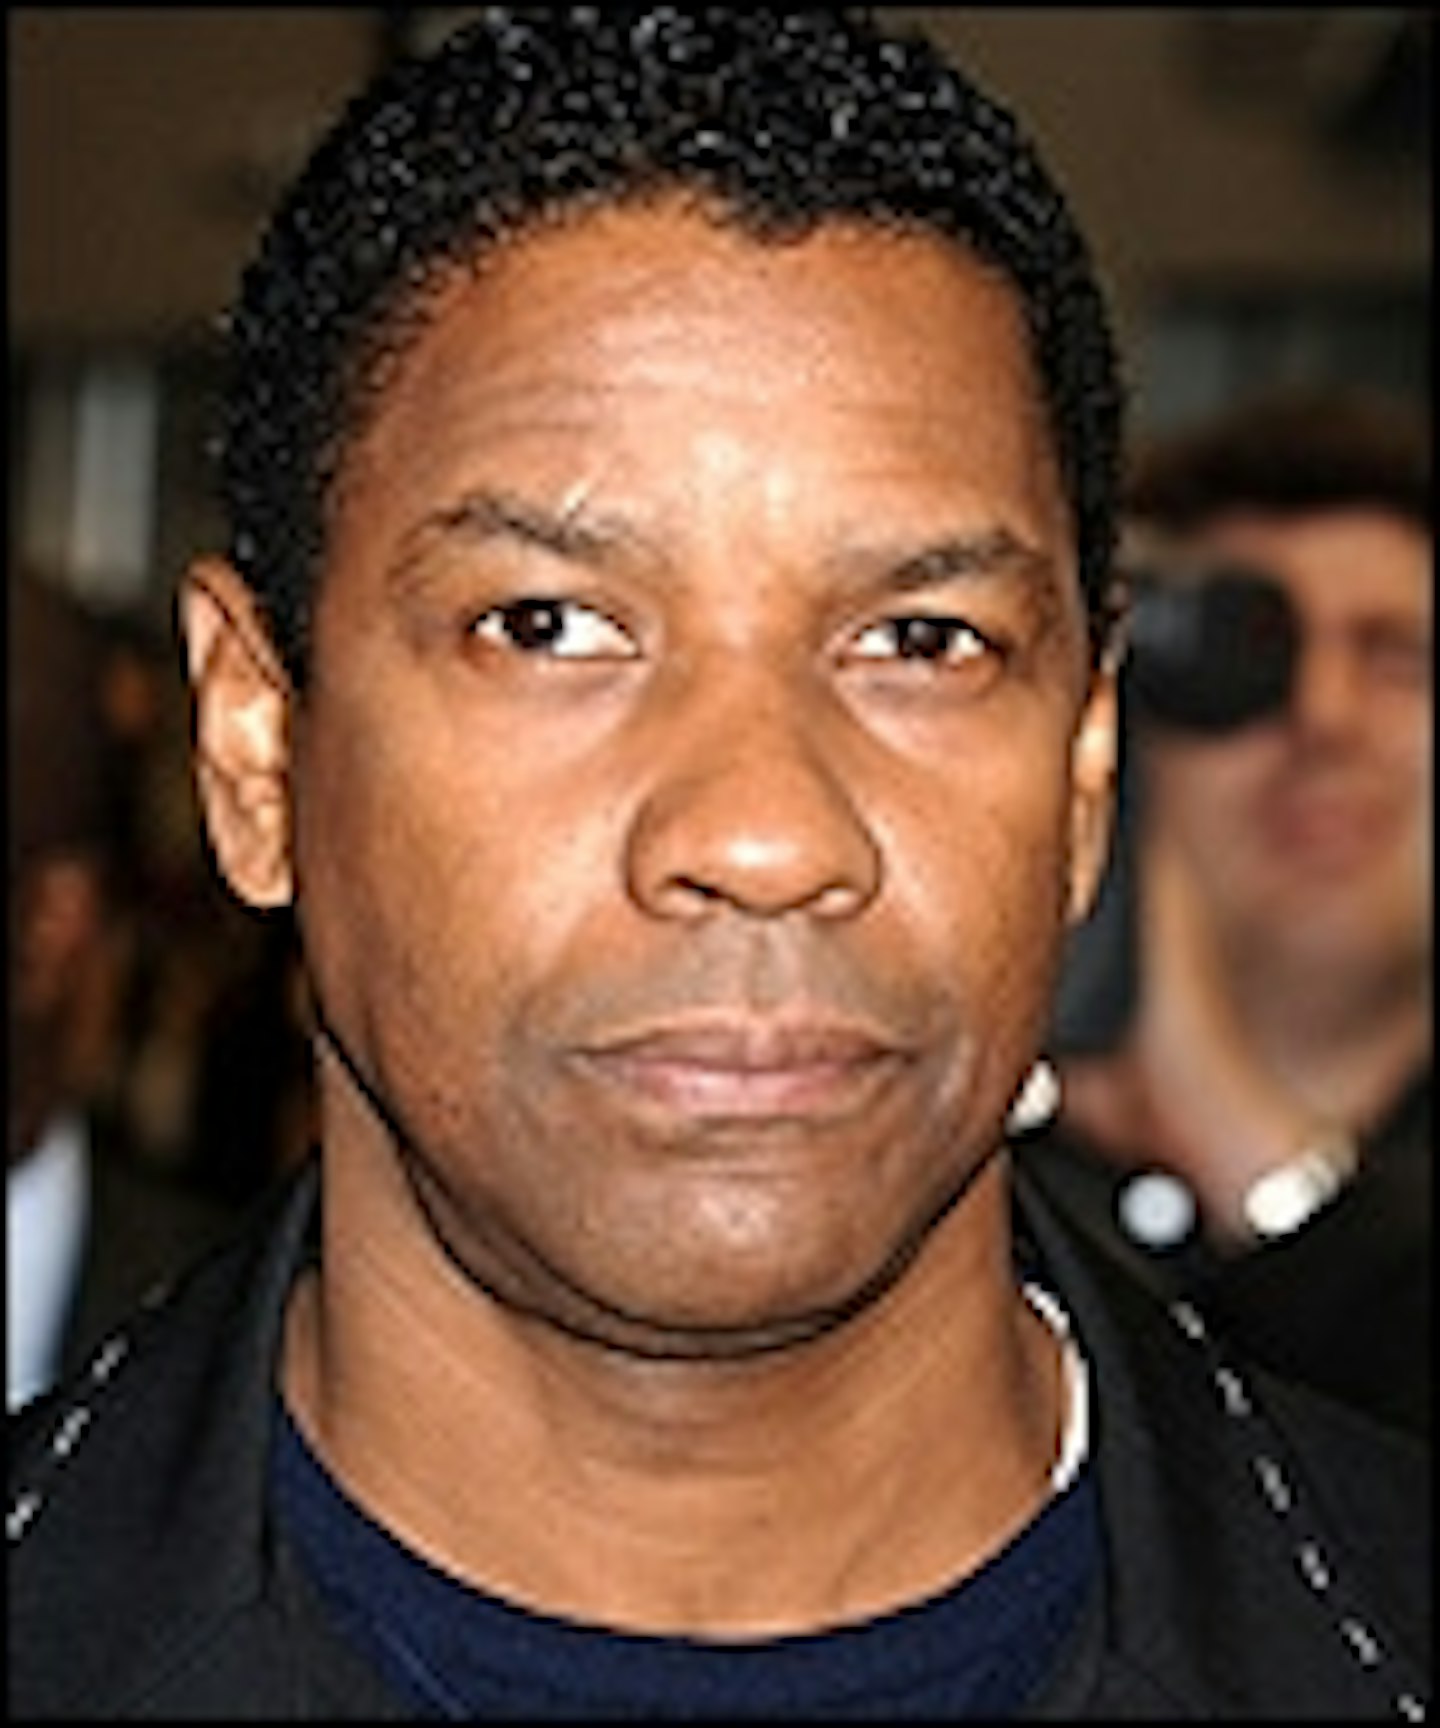 Denzel May Know The Secret In Their Eyes